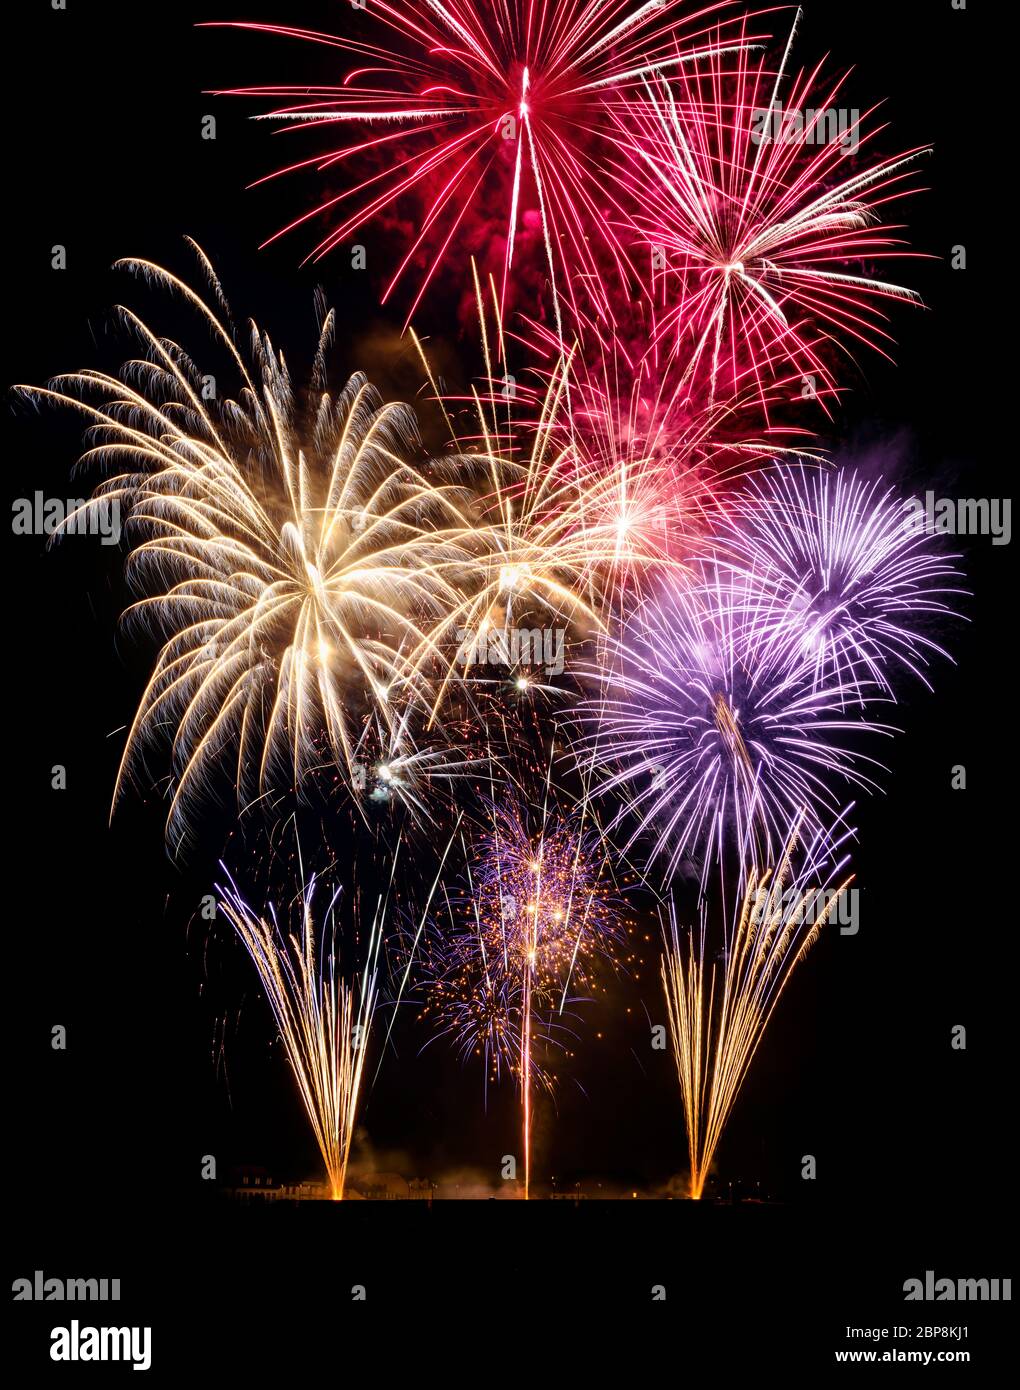 Gorgeous fireworks on black background, ideal for New Year or other celebration events, vertical format Stock Photo